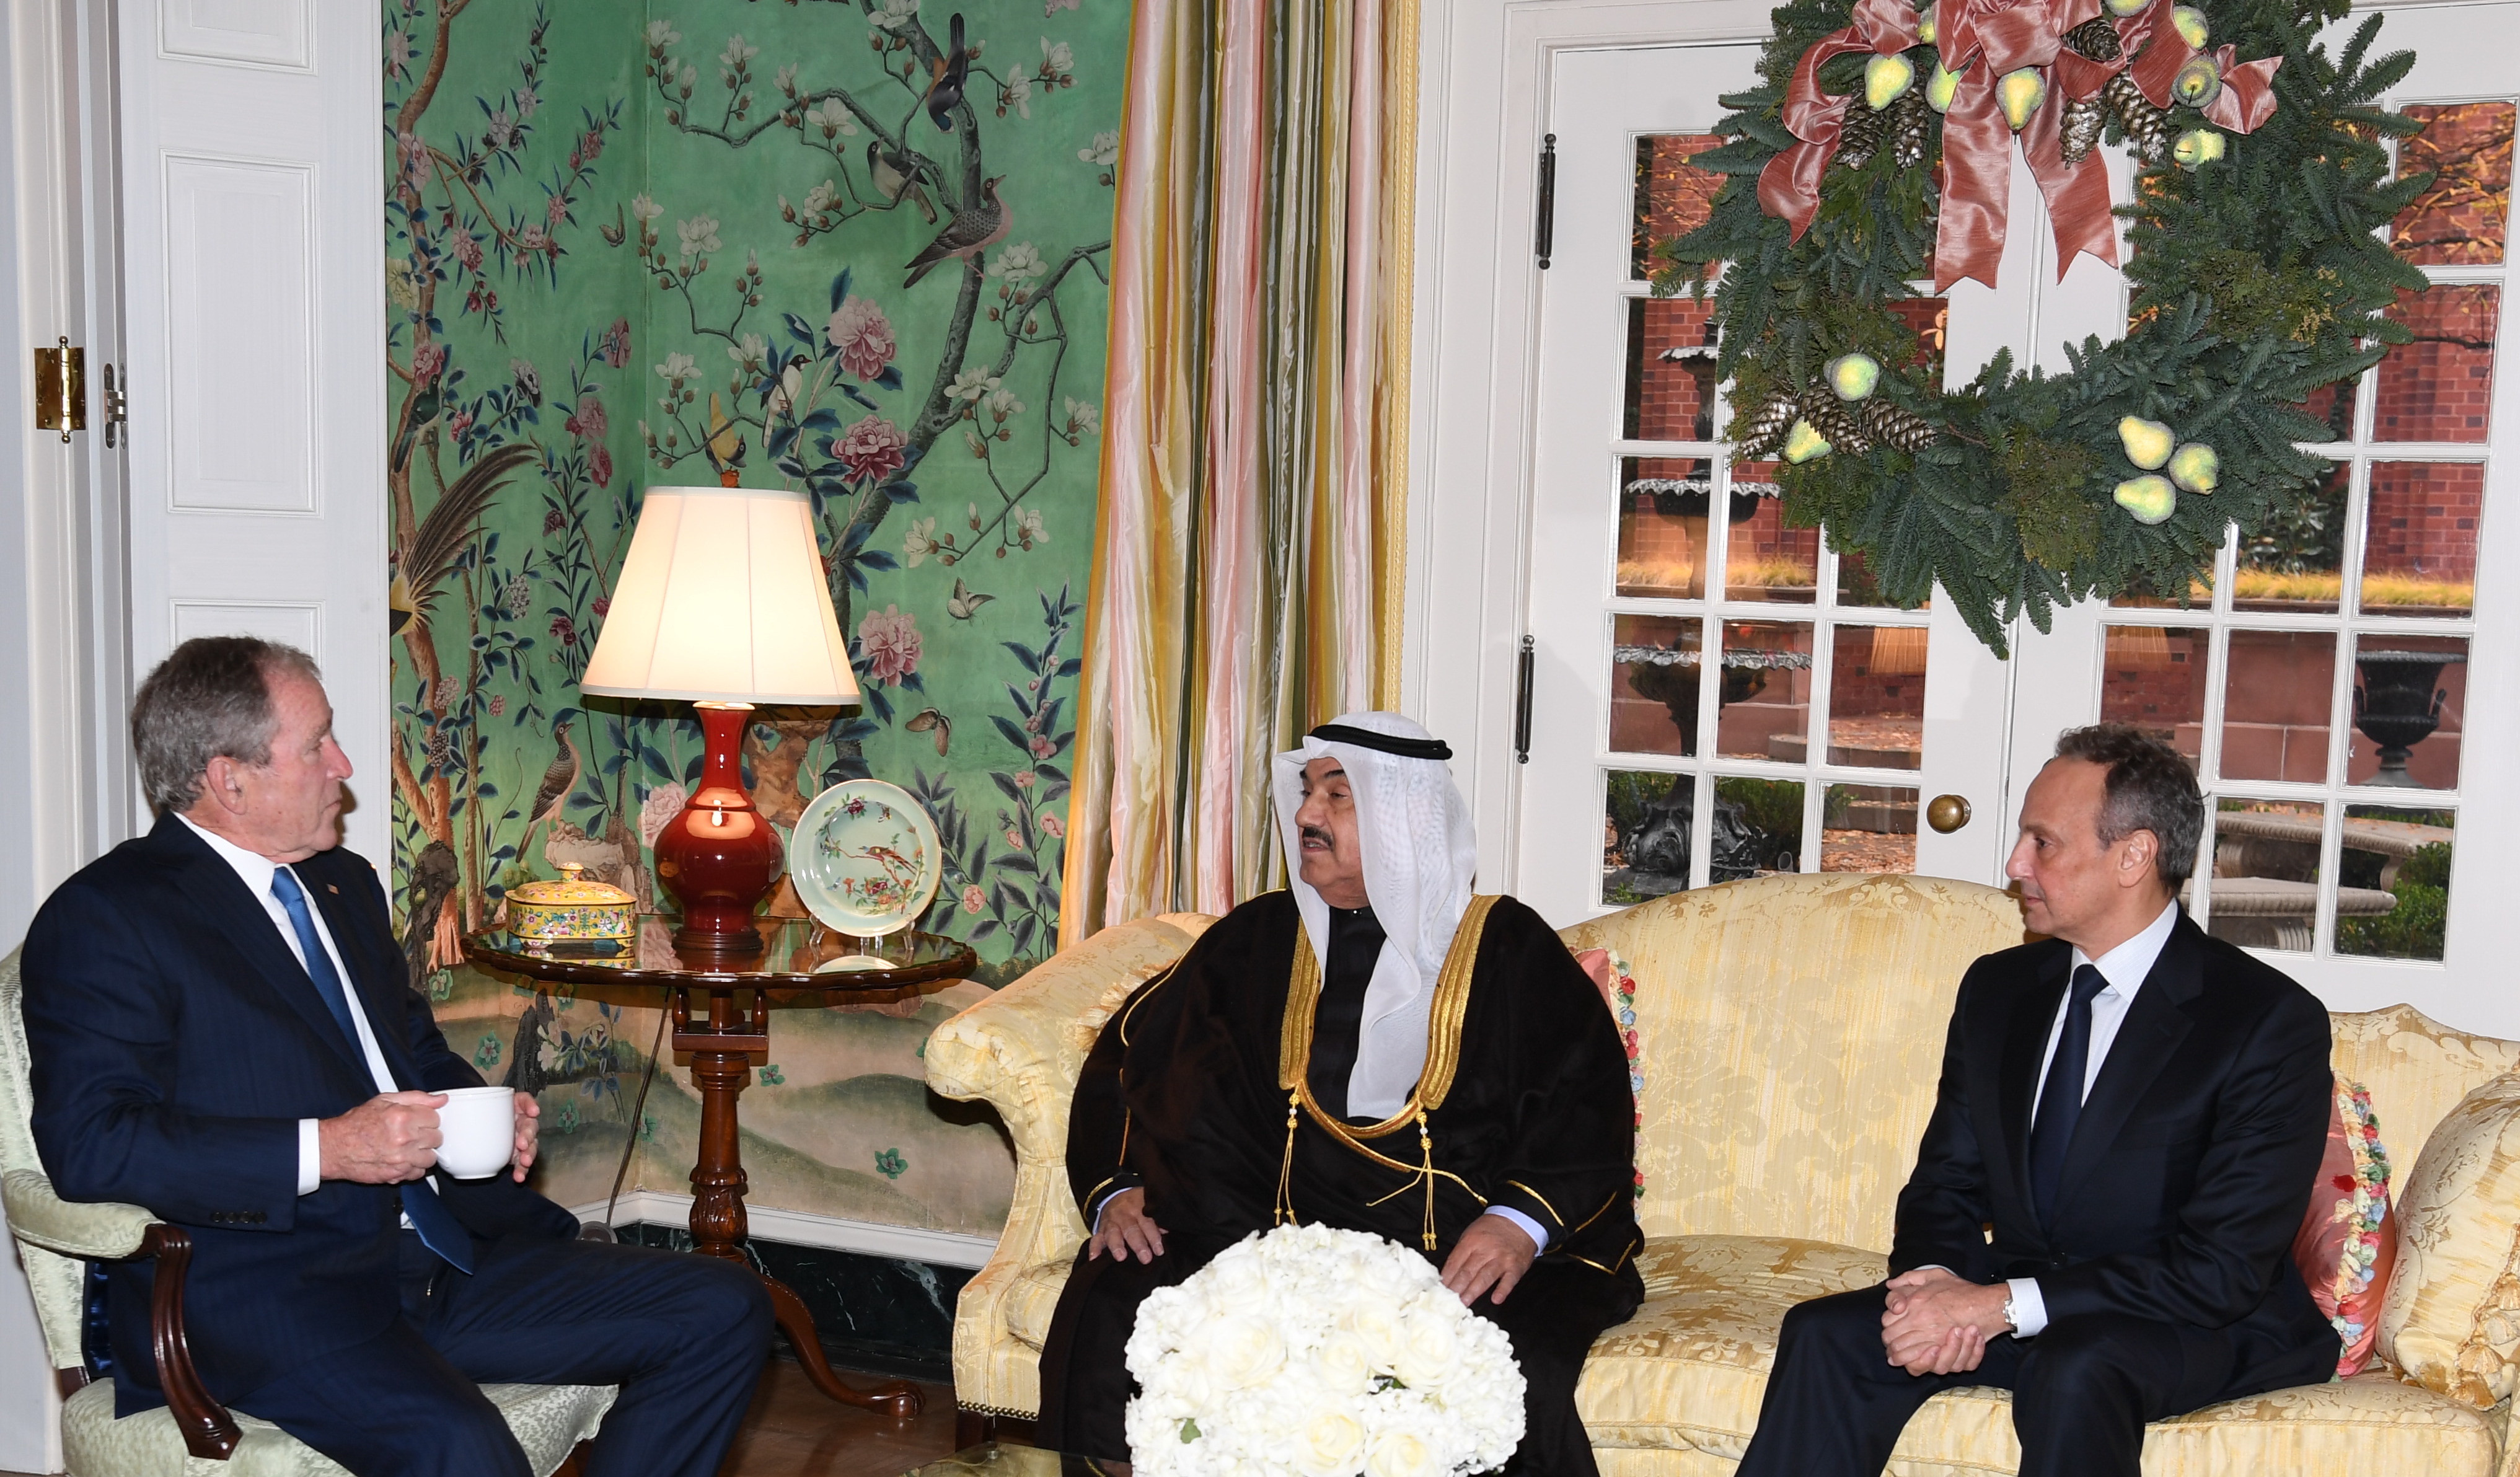 His Highness Sheikh Nasser Al-Mohammad Al-Ahmad Al-Sabah, the Representative of His Highness the Amir pais a visit to the US 43rd president, George W. Bush